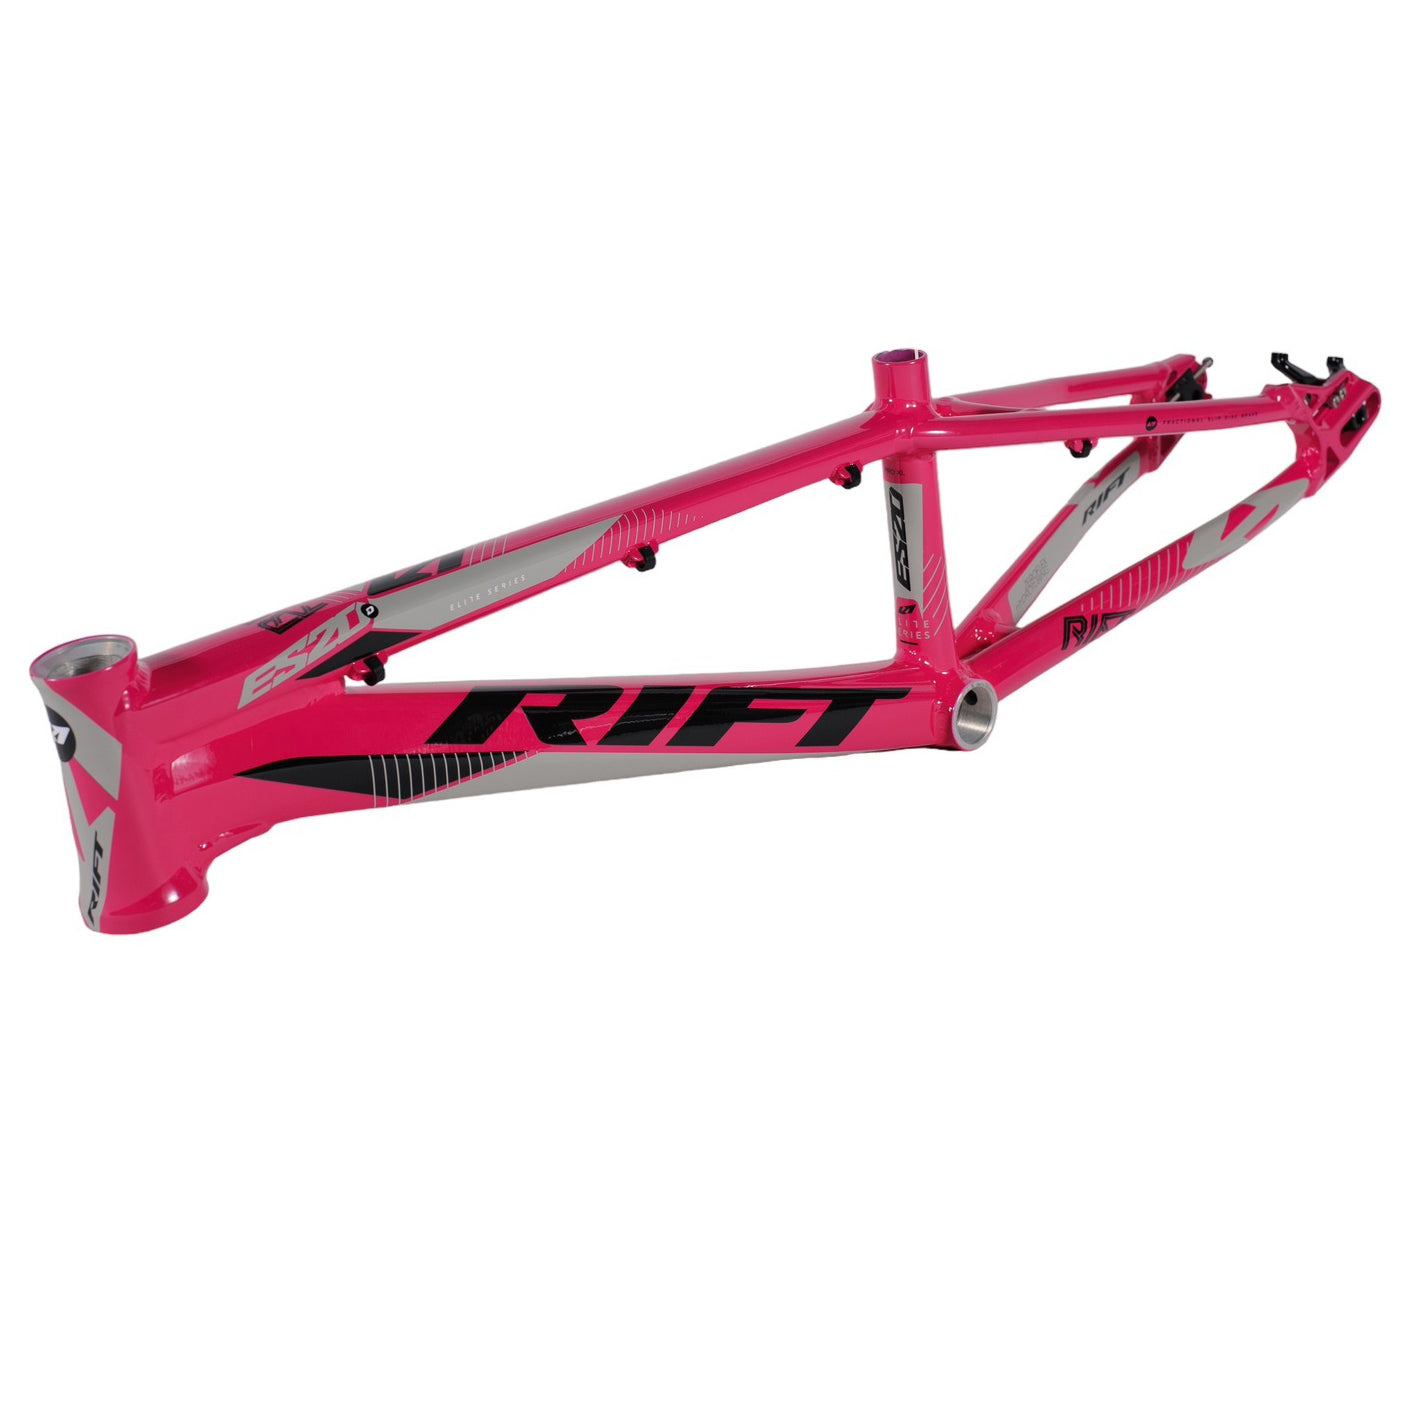 A Rift ES20D Frame Pro XXXL bike frame on a white background, designed for race season with disc only.